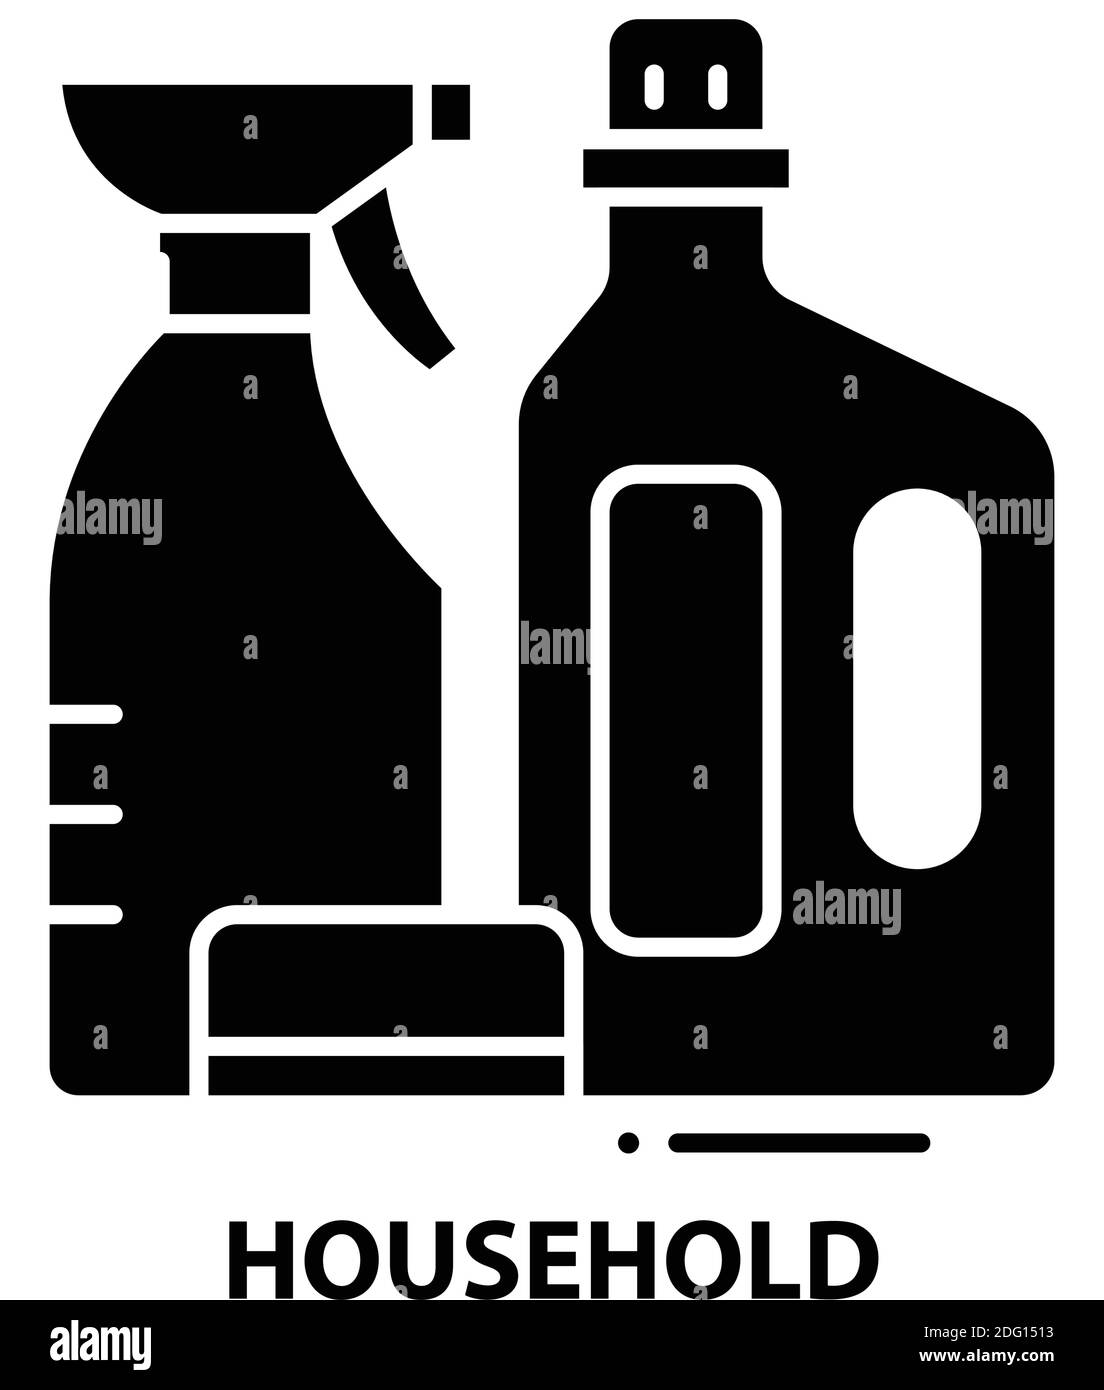 household icon, black vector sign with editable strokes, concept illustration Stock Vector